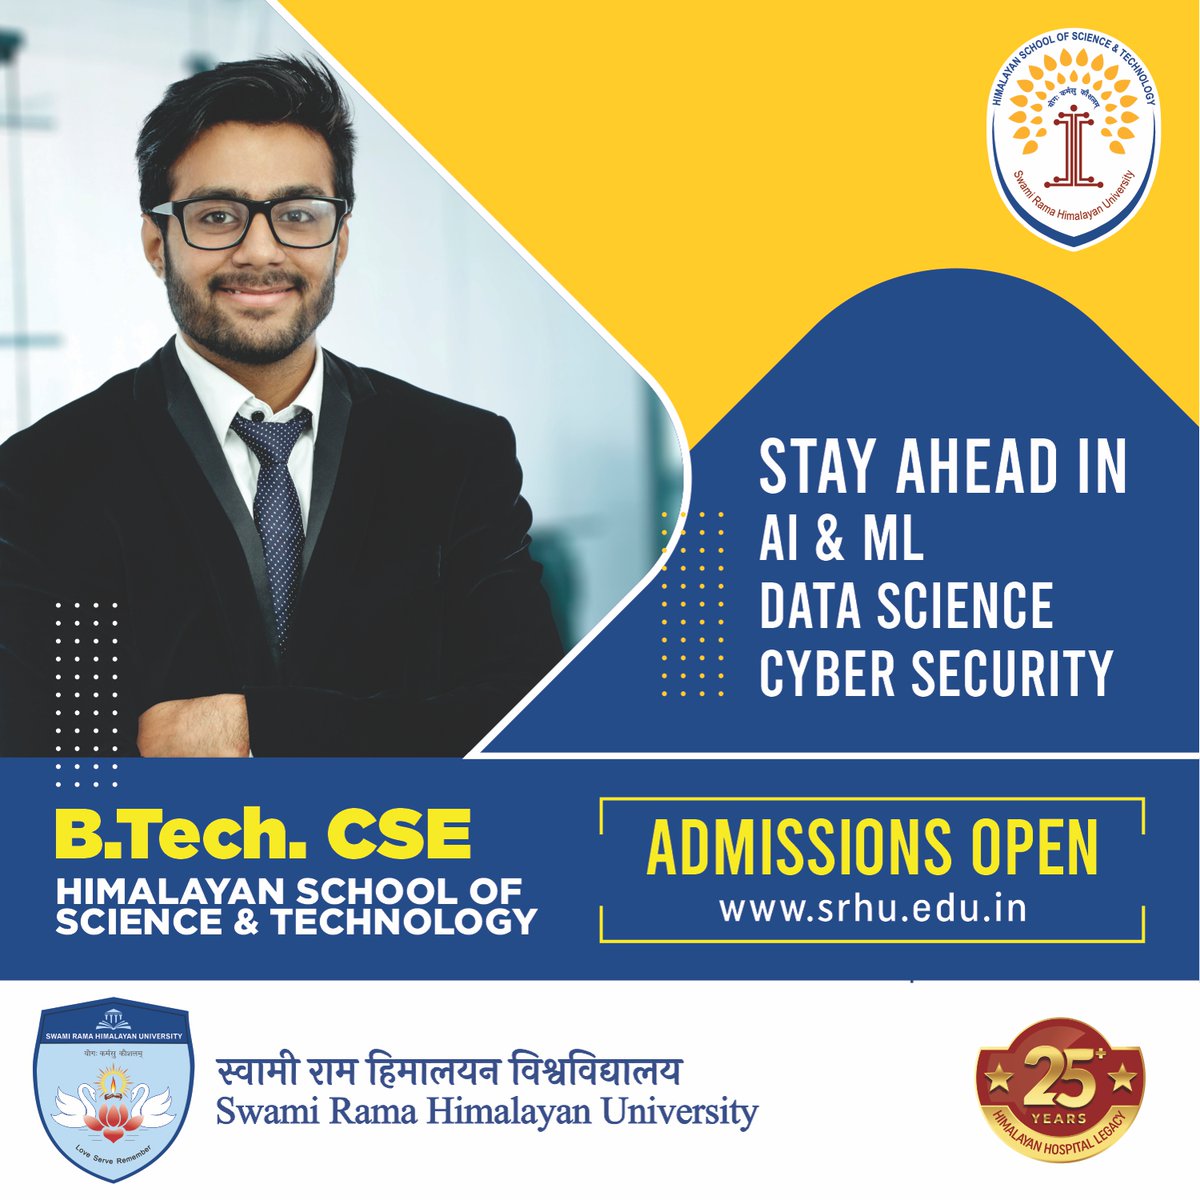 Specialize in Artificial Intelligence & Machine Learning, Data Science & Machine Learning and Cyber Security. Limited Seats!
Visit:
srhu.edu.in/himalayan-scho…
#SRHU #HSST #Engineering #ComputerScience #BTech #CSE #Admissions #Admissions2023 #EngineeringCollege #IT #University